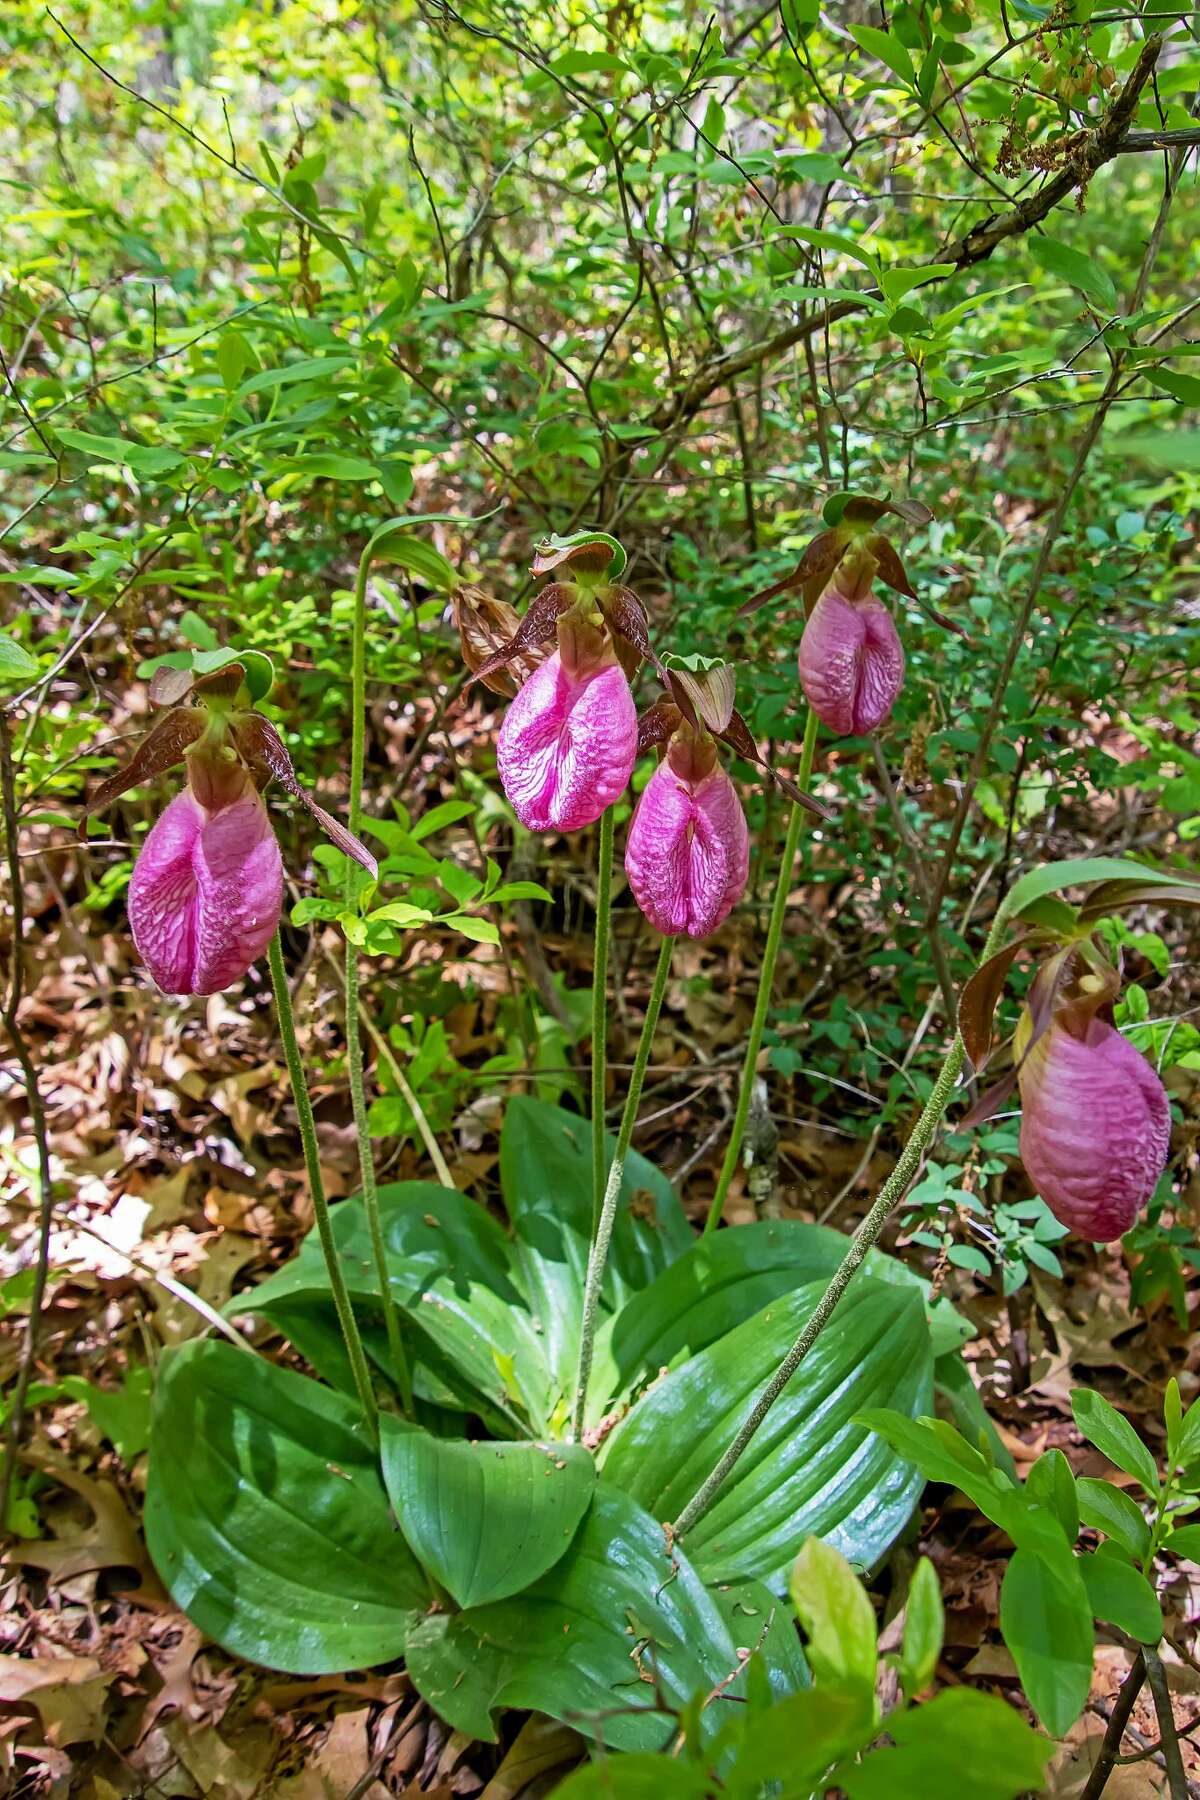 The Huron County Nature Center held its annual Lady's Slipper event May 30 and opened its new trail system.